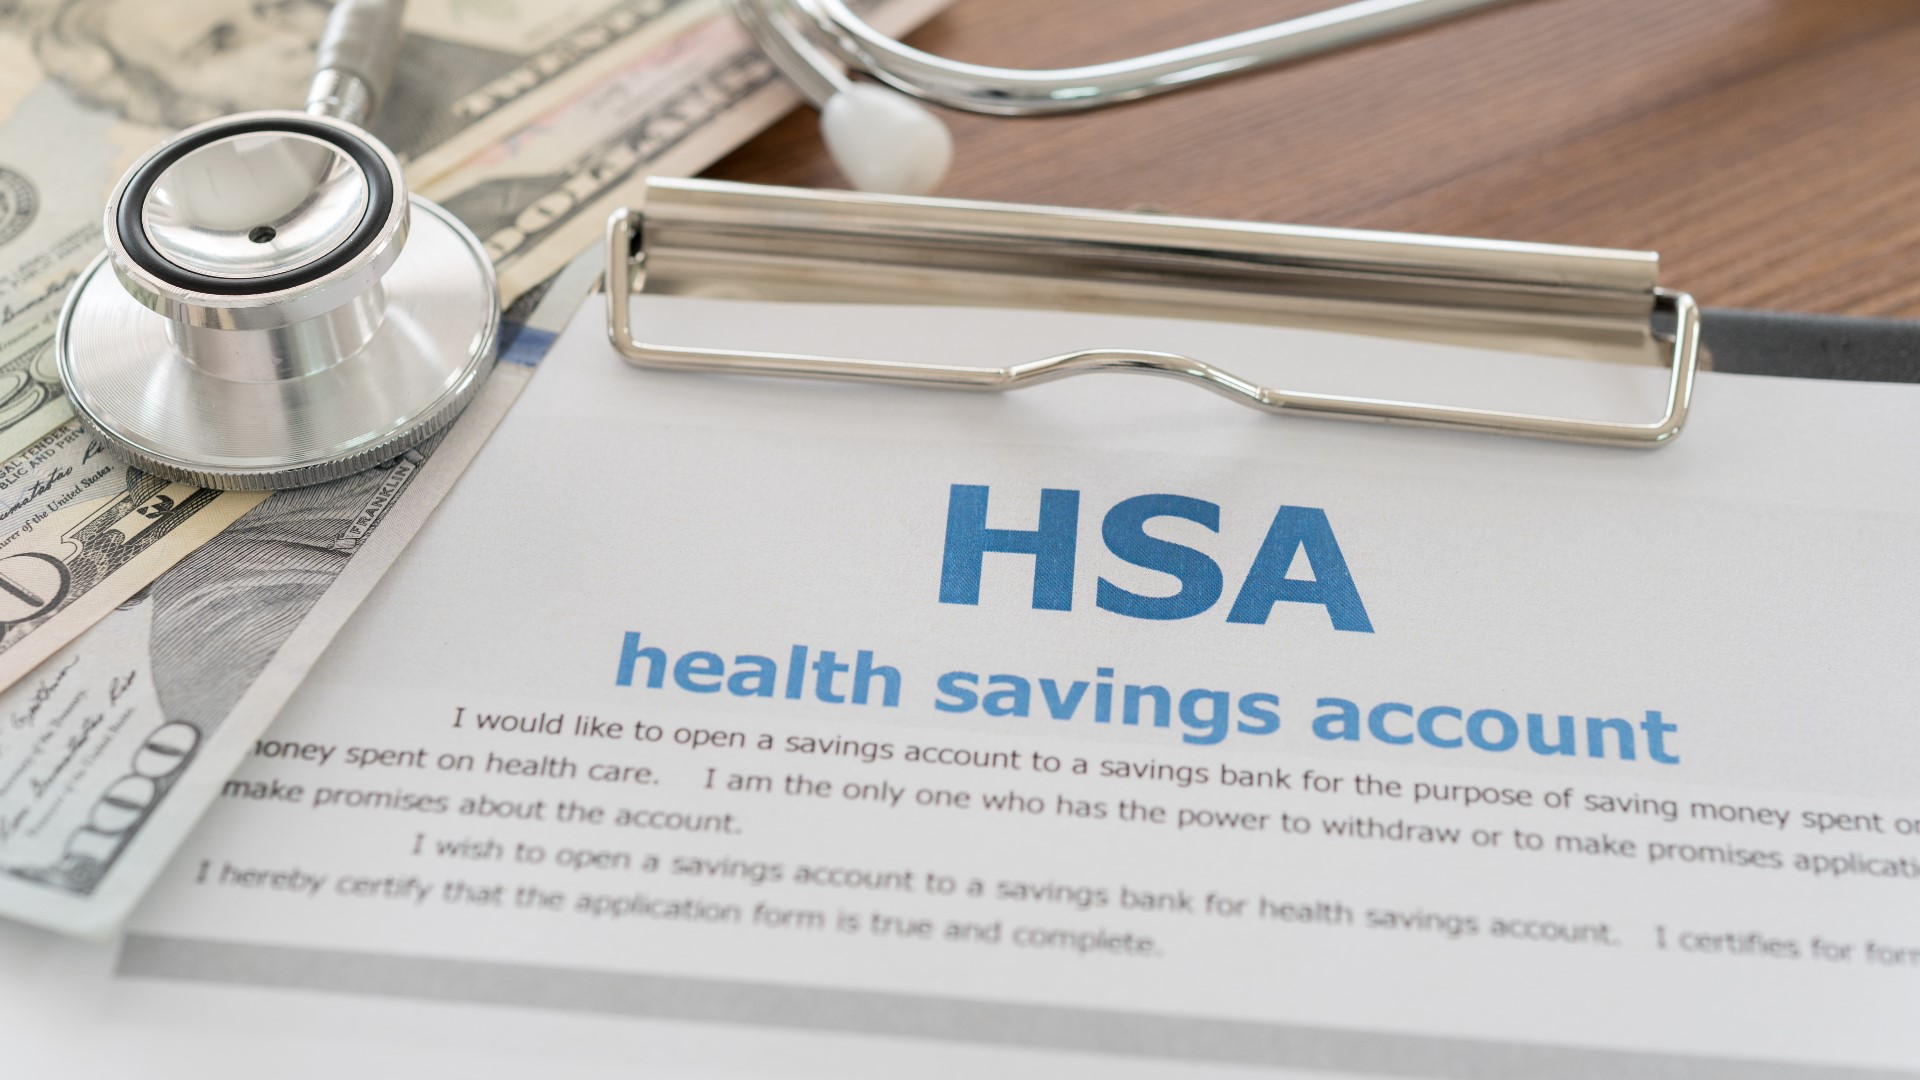 HSA funds can be invested like a 401k, in mutual funds, index funds, any different type of security.